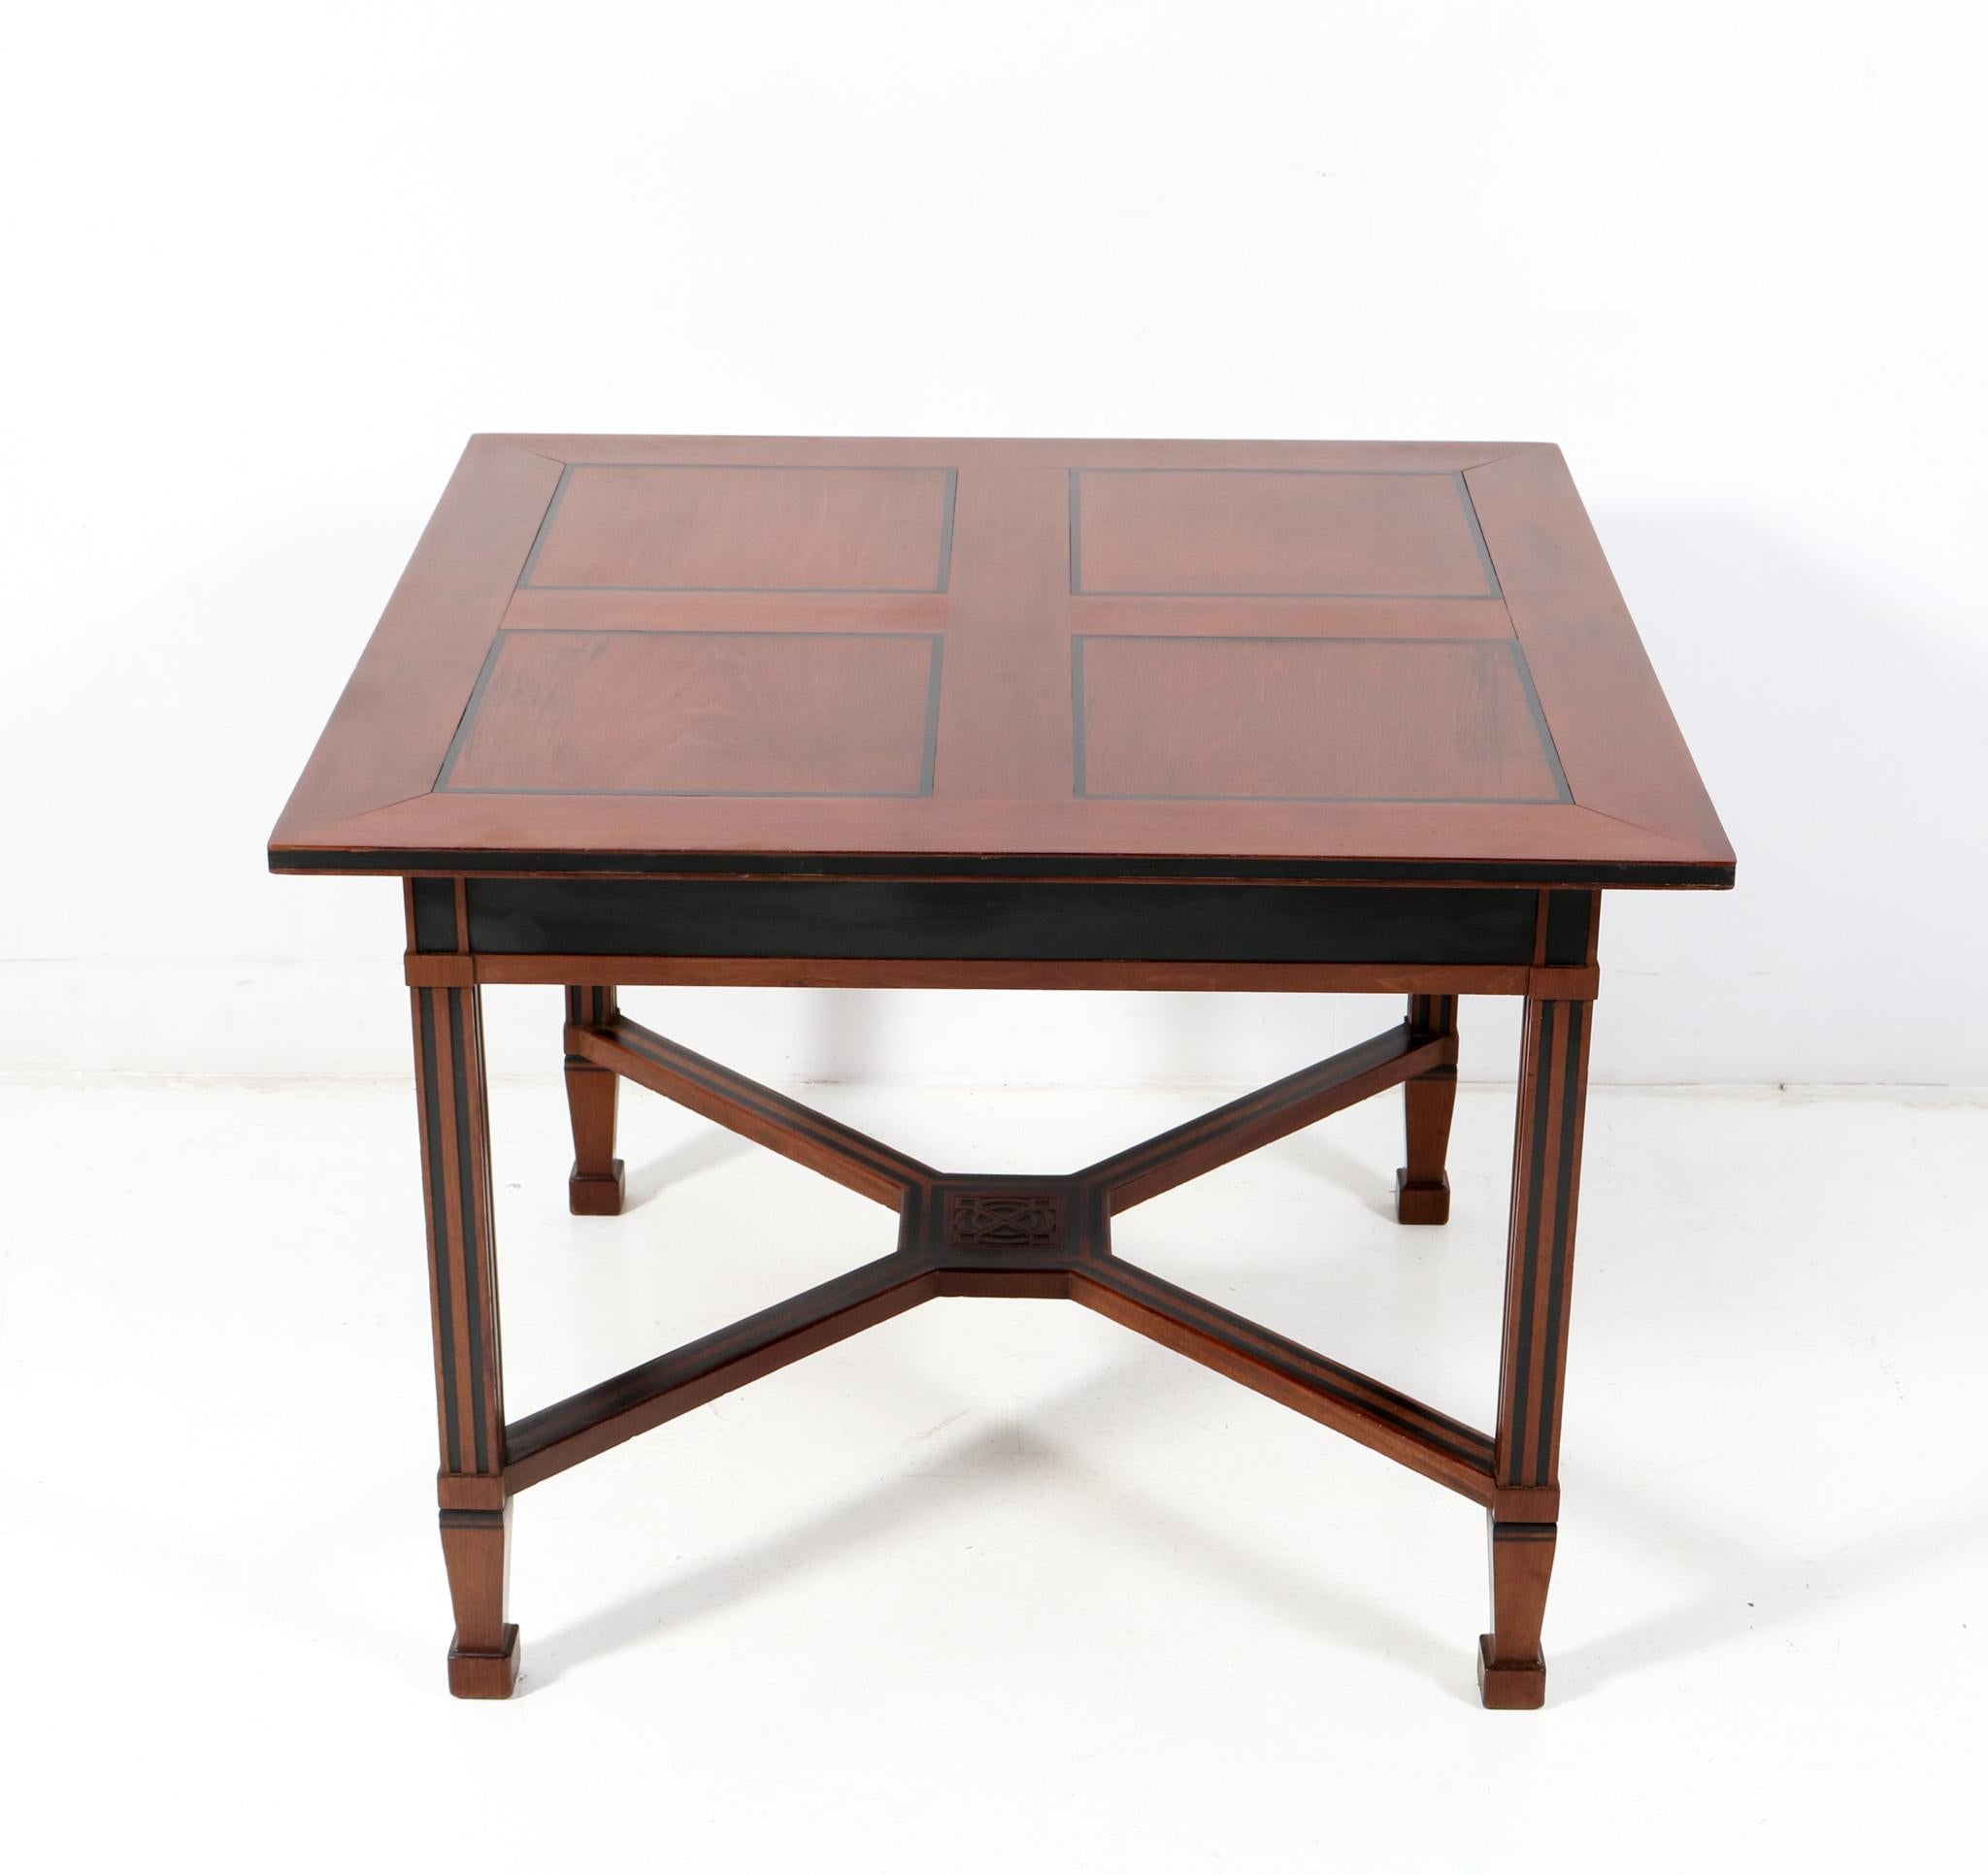 Amazing and rare Art Nouveau Arts & Crafts table or writing table.
Design by K.P.C. de Bazel.
Striking Dutch design from the 1900s.
Solid walnut base with original walnut and black lacquer top.
This wonderful Art Nouveau Arts & Crafts table or